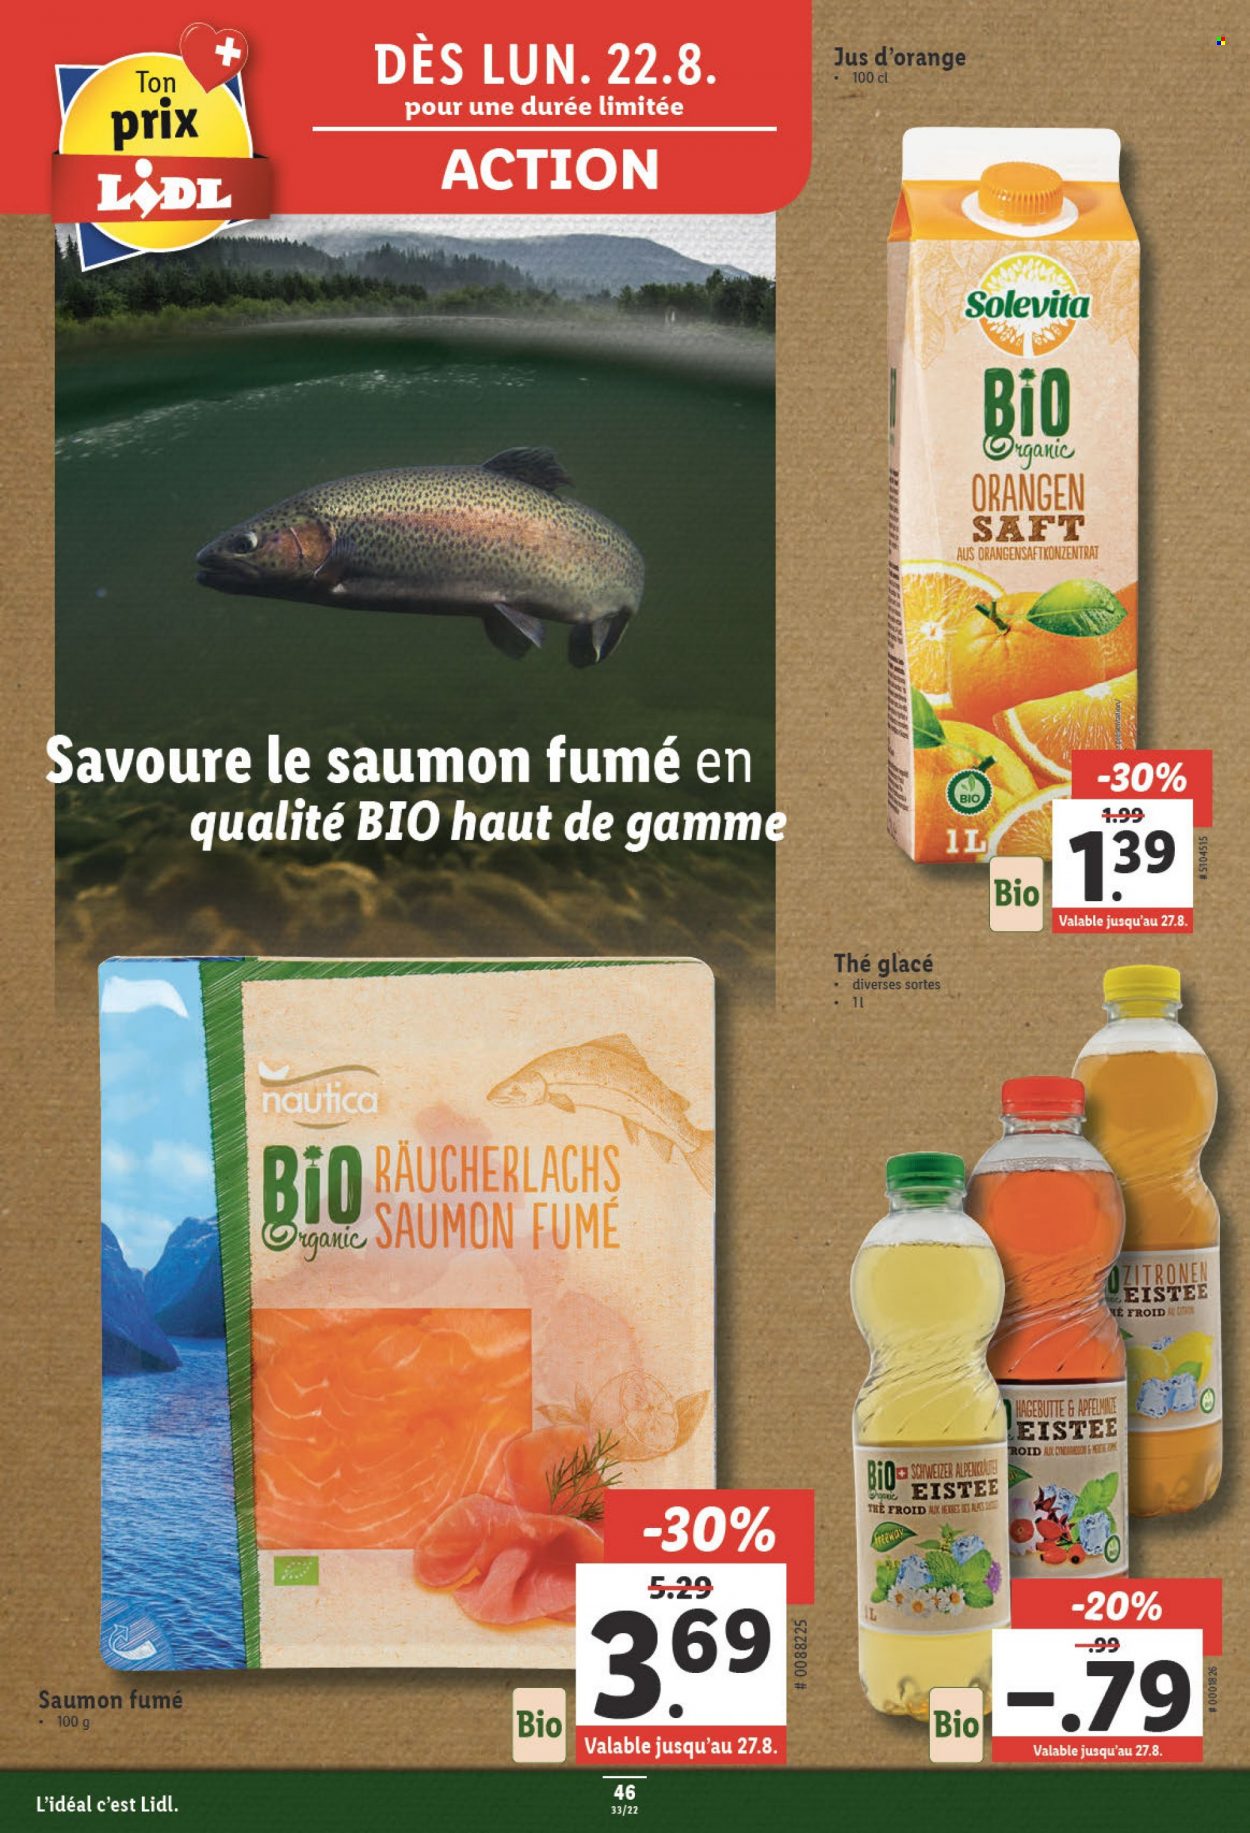 Catalogue Lidl - 18.8.2022 - 24.8.2022. Page 46.